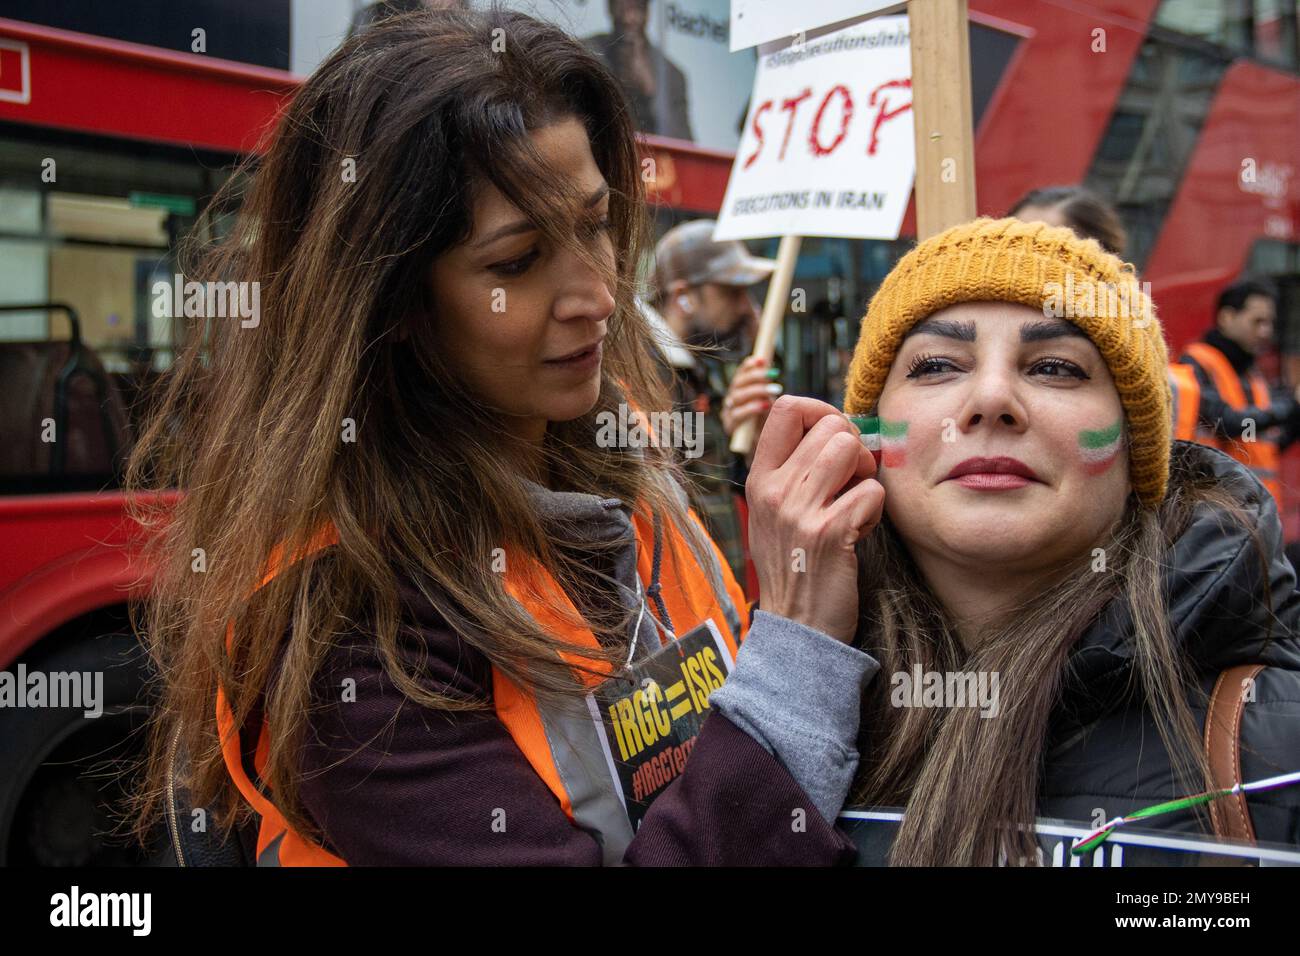 London, UK – Feb 4, 2023: A protester paints the Iranian flag colours on the face of another protester. About two hundred British-Iranians from different political backgrounds marched from Cavendish Square to Trafalgar Square, asking the UK government to put the Islamic Revolutionary Guard Corps of Iran on its terrorist list.  Credit: Sinai Noor/Alamy Live News Stock Photo